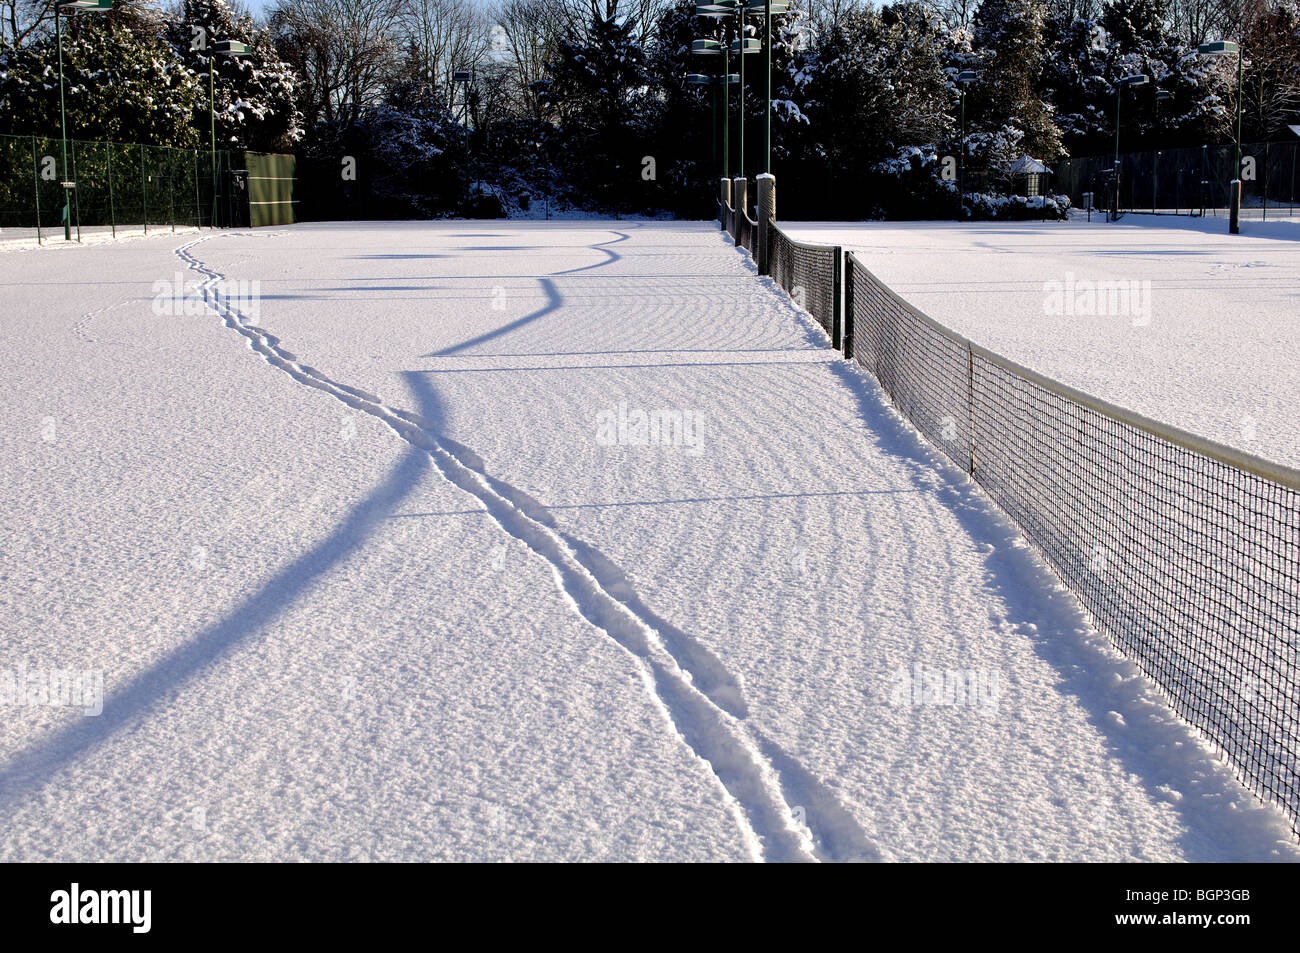 Tennis courts covered in snow, Warwick, UK Stock Photo